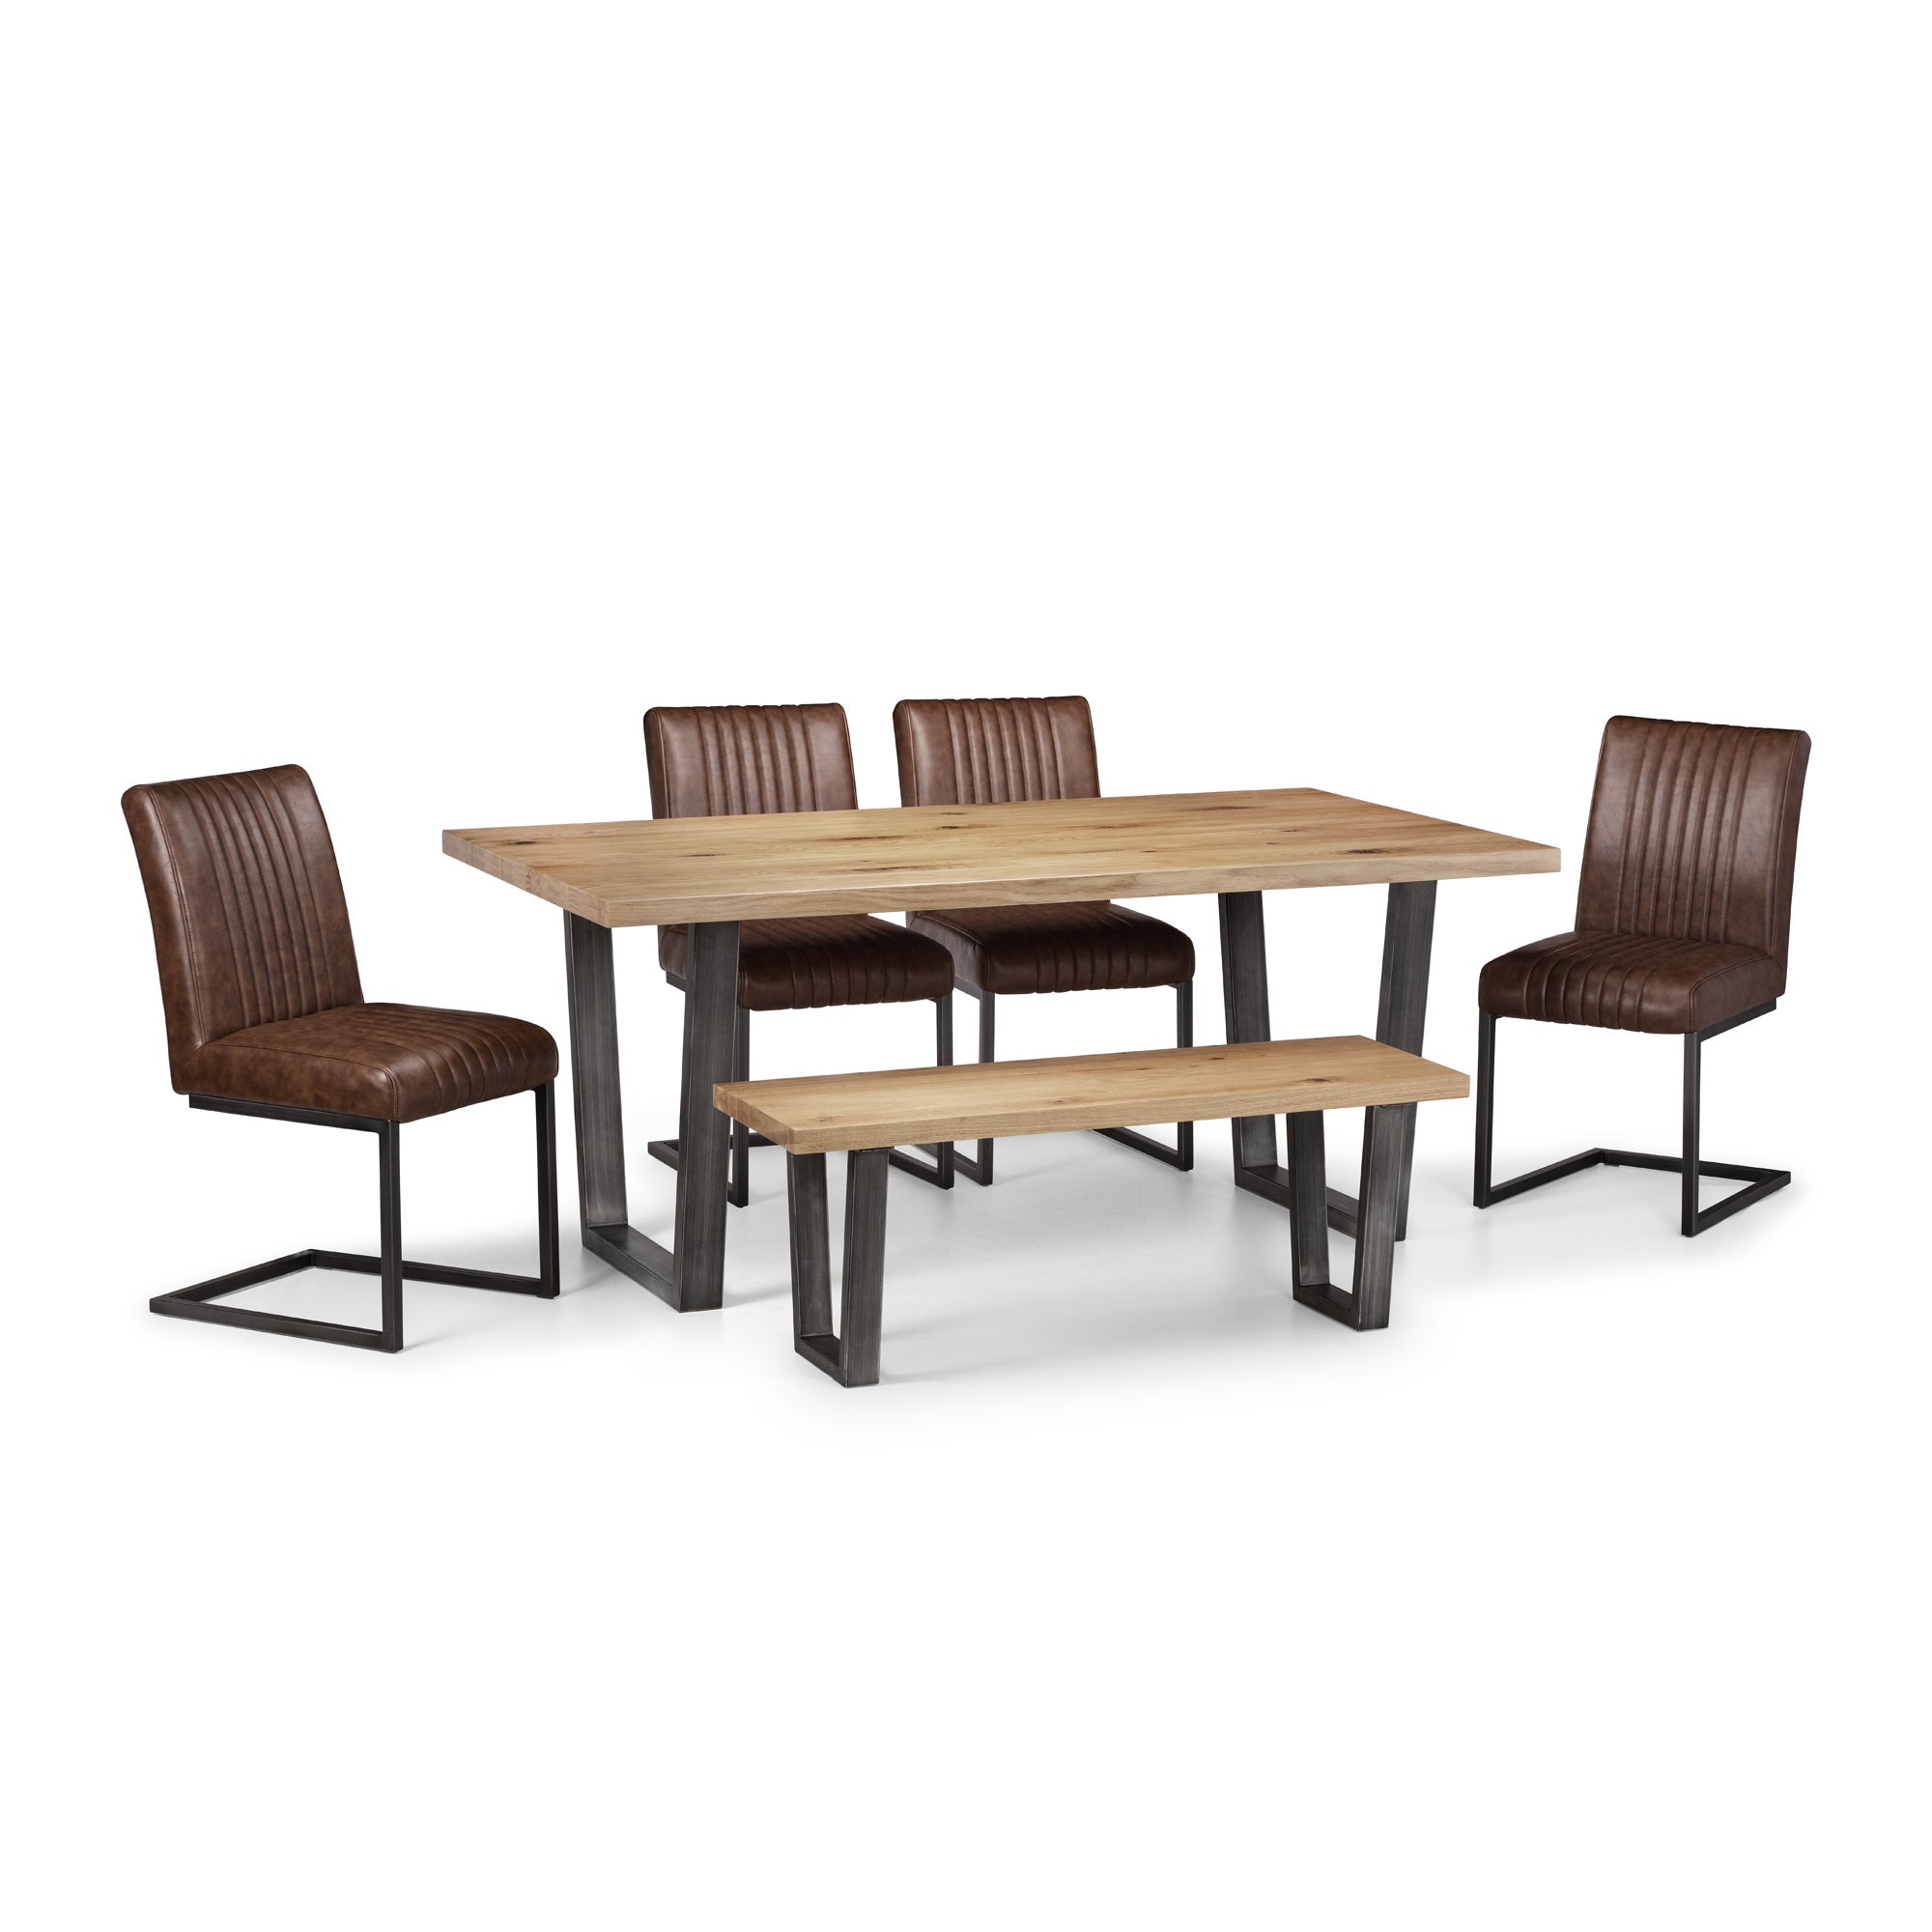 Brooklyn Oak Dining Table Set with 4 Chairs and Bench Brown